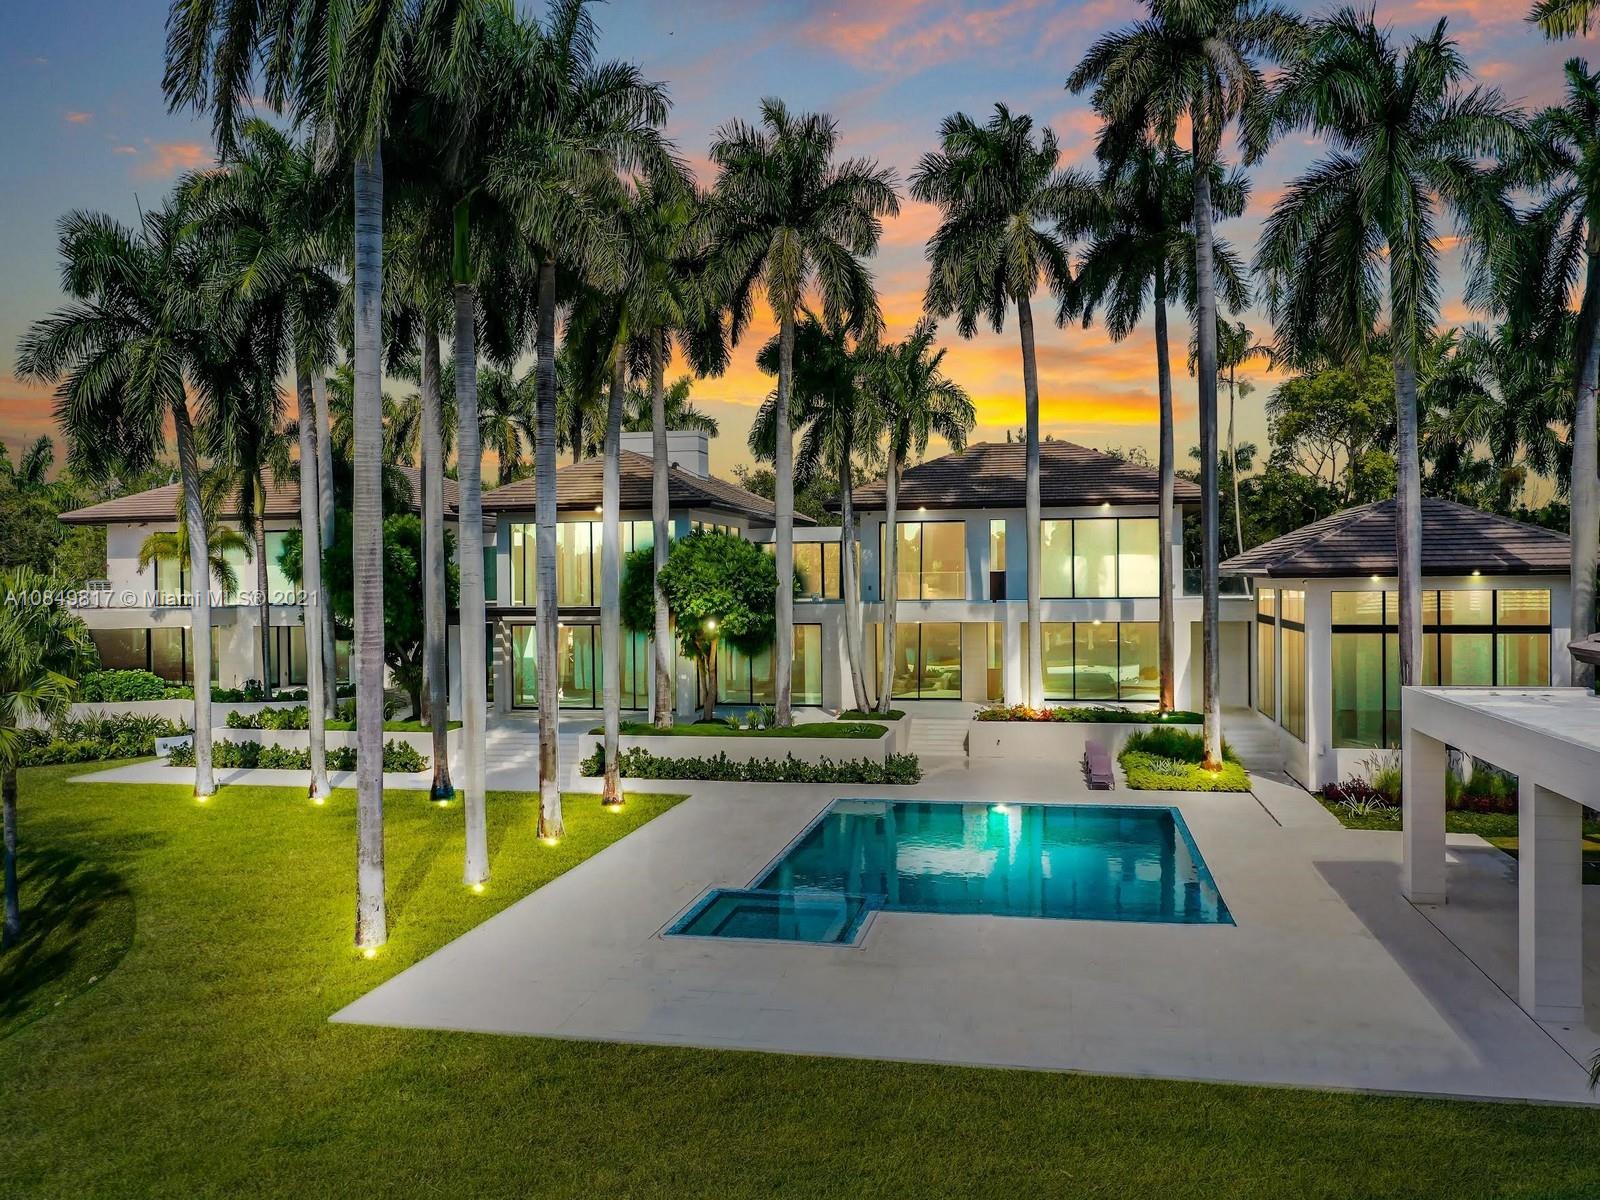 THIS SPECTACULAR ESTATE IN THE EXCLUSIVE GATED COMMUNITY OF GABLES ESTATES, OFFERS 22,374 SQFT, ON 87,125 SQFT LOT, 8 BD,14.5 BA,345 FT. EXPANDED LAGOON WATERVIEW.. BY PRESTIGIOUS ARCHITECT ERIC BREWER. ELEGANT,MODERN SOPHISTICATED ARCHITECTURE W/AN IMPRESSIVE IN LARGE SCALE HOME DESIGNED W/THE FINEST IMPORTED FINISHES. PYRGON, MARBLE & WOOD FLOORS. PERGOLAS ,WATERFALL,POOLS LEADS TO THE IMPRESSIVE FOYER & LIVING ROOM DOUBLE VOLUME CEILINGS. THIS SMART HOME BY CRESTONS SYSTEM CONTROL LIGHTING,AC,TVs,MUSIC,ETC. A WATERVIEW MASTER SUITE W/PRIVATE OFFICE,HIS & HERS MARMOL BATHROOMS,CUSTOM-BUILT CLOSETS,AMAZING BALCONY OVERLOOKING THE GUEST HOUSE,POOL,GYM. PROFESSIONAL KITCHEN W/ TOP OF THE LINE WOLF,MIELE & SUBZERO APPLIANCES,5,000 BOTTLE WINE CELLAR,SUMMER KITCHEN,THEATER,SAUNA, MASSAGE ROOM